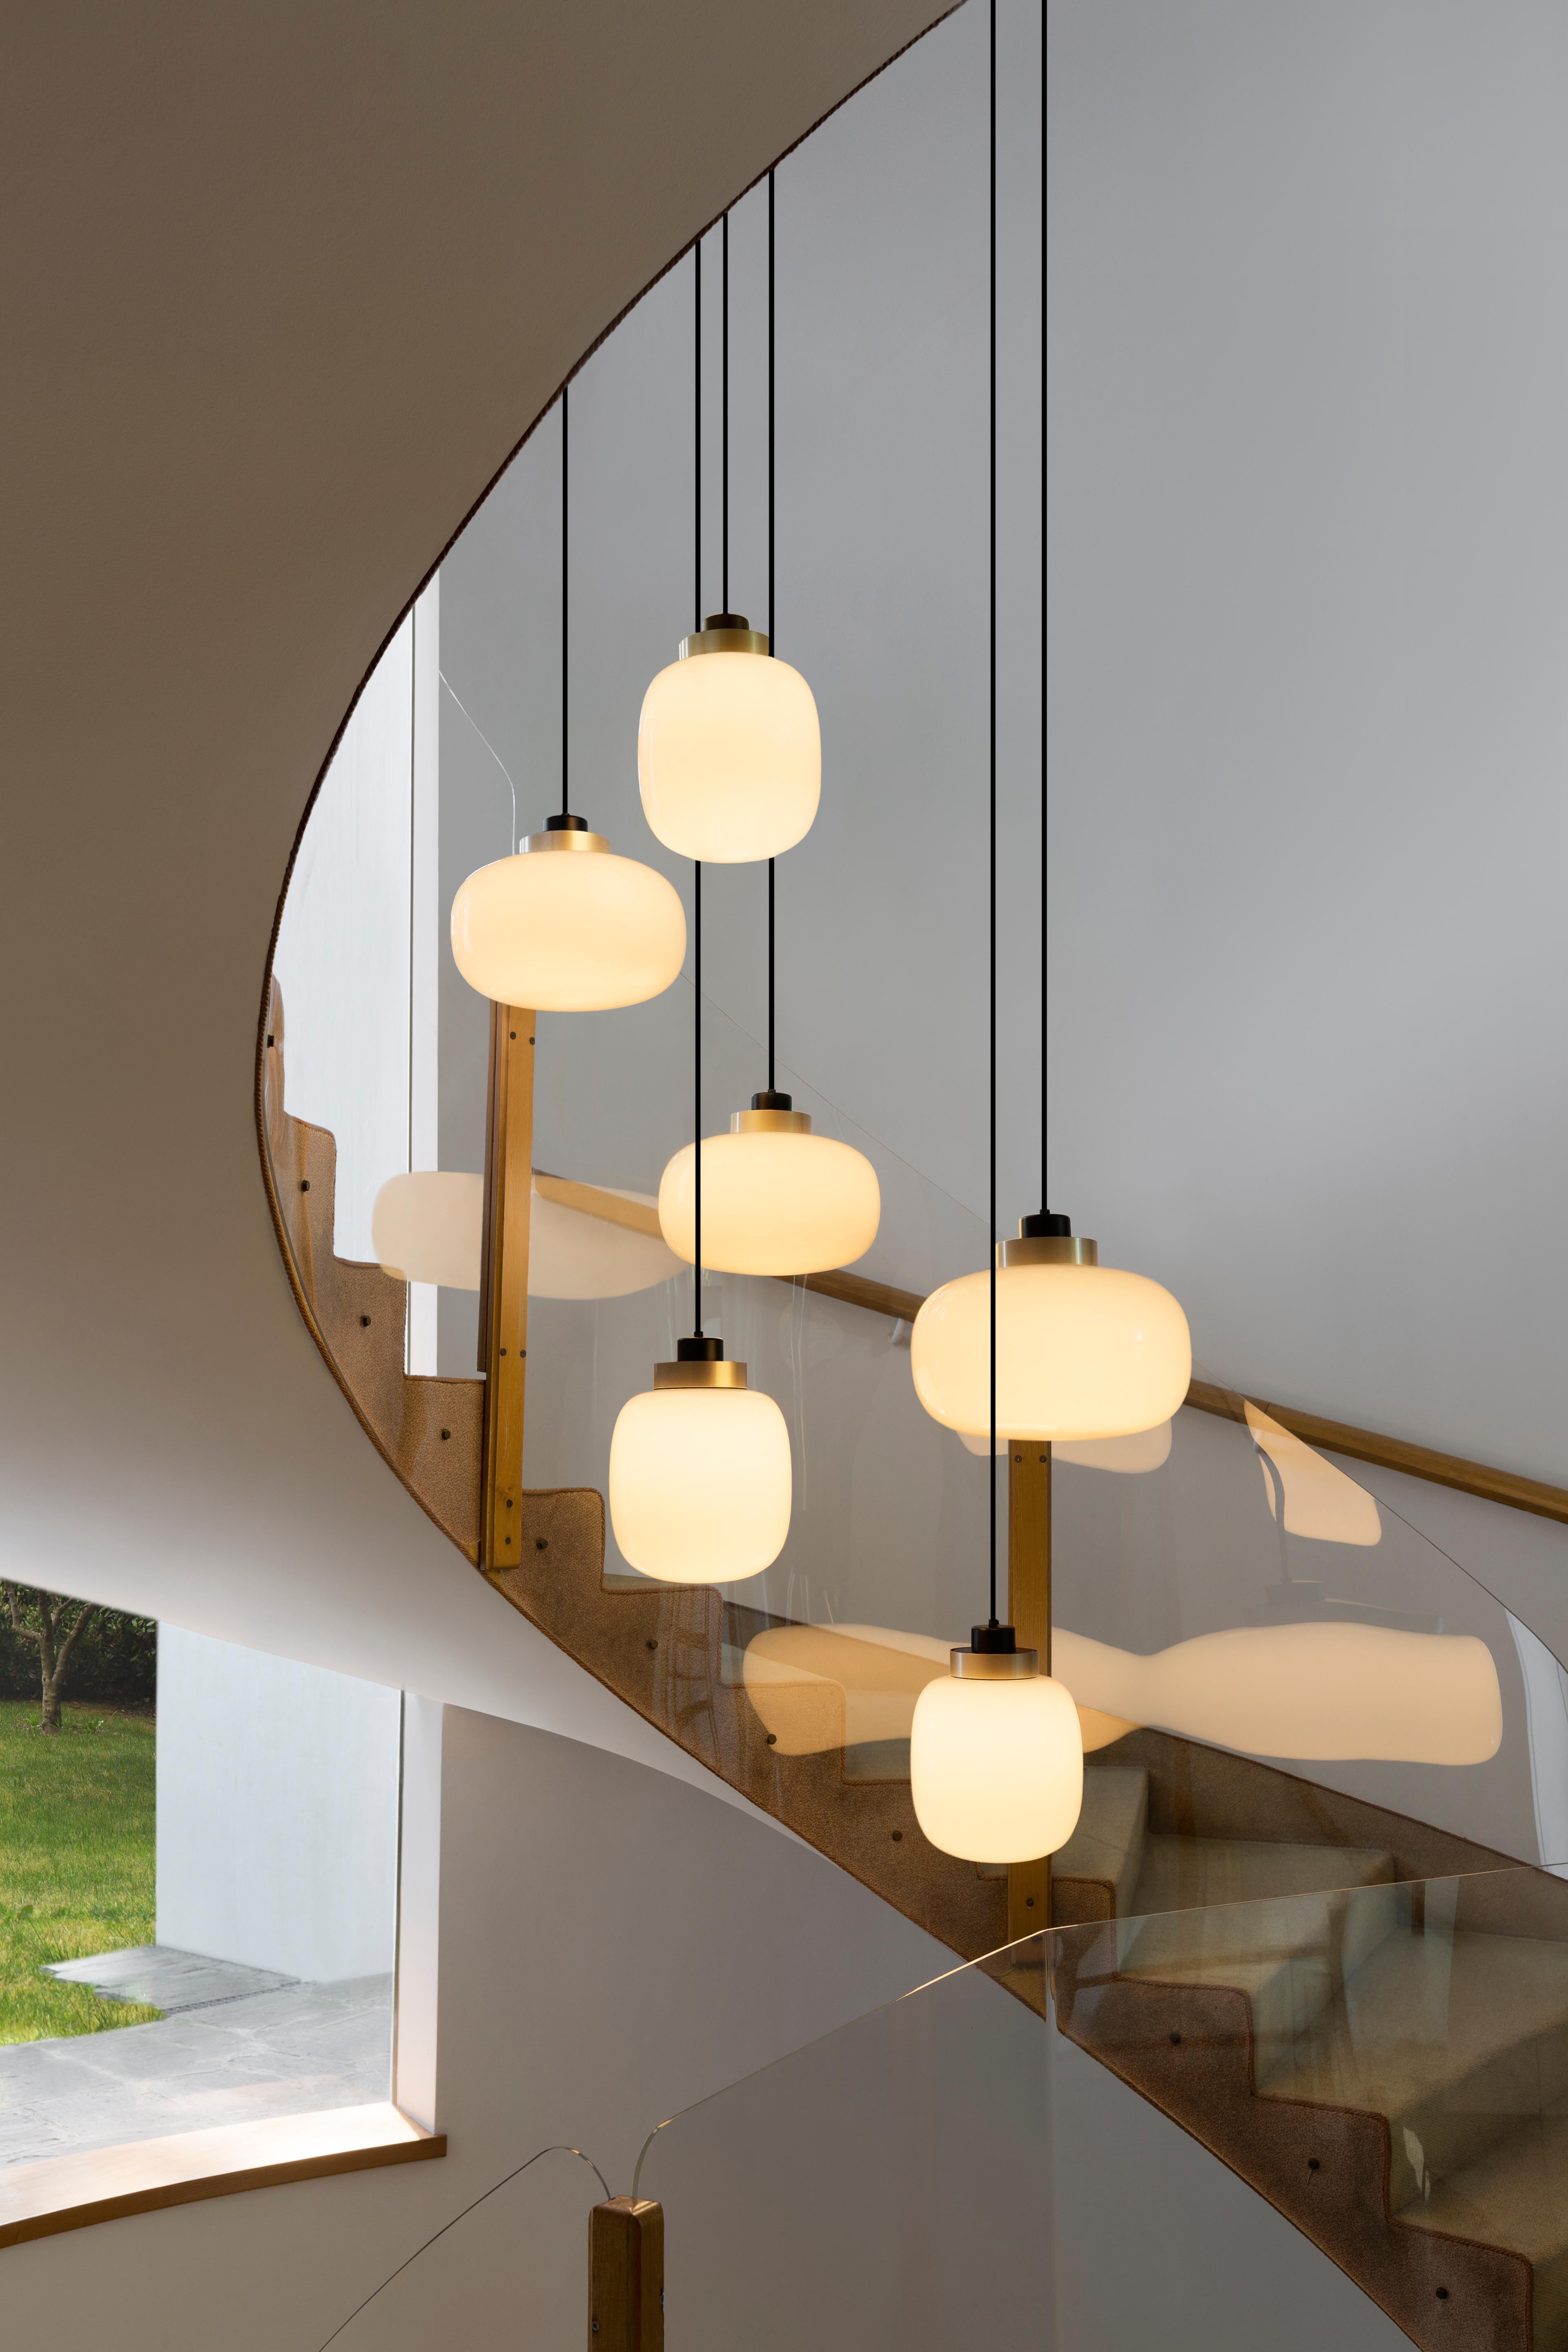 Chandelier legier by Tooy.
4 pendants version
Legier 557.14 Compliant with US electric system

Dimensions: 
- Small pendant (x 2 ): Height 33 cm x diameter 25 cm. 
- Large pendant (x 2 ): Height 28 cm x diameter 35 cm. 

Model shown: C74 +